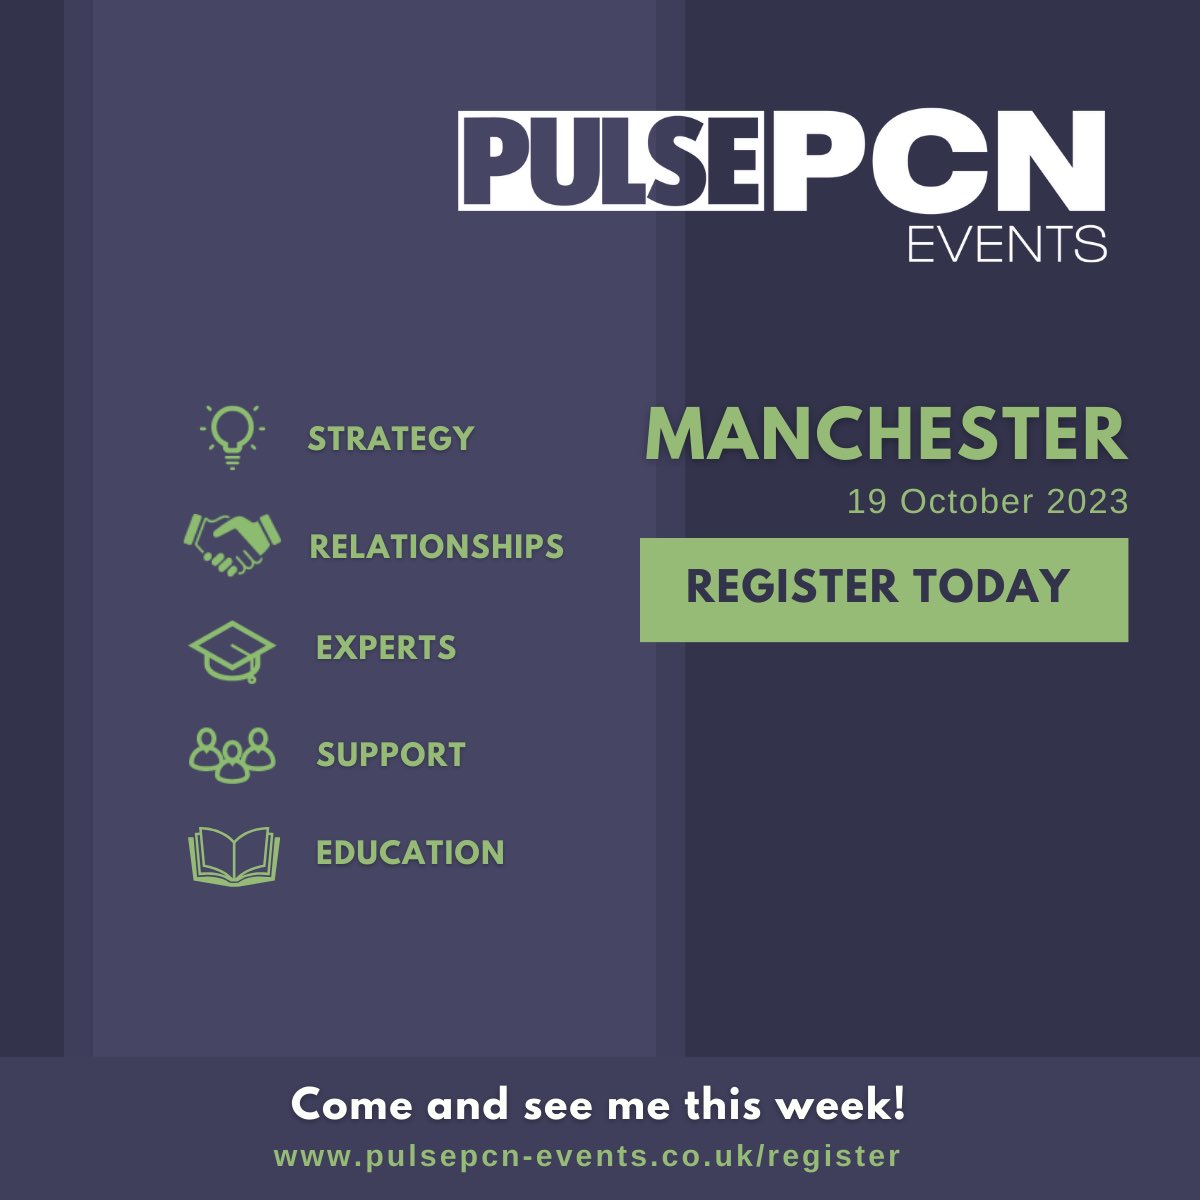 Join me for the day on Thursday at PulsePCNManchester event we are talking access vs continuity, economy forecasting and all things PCN